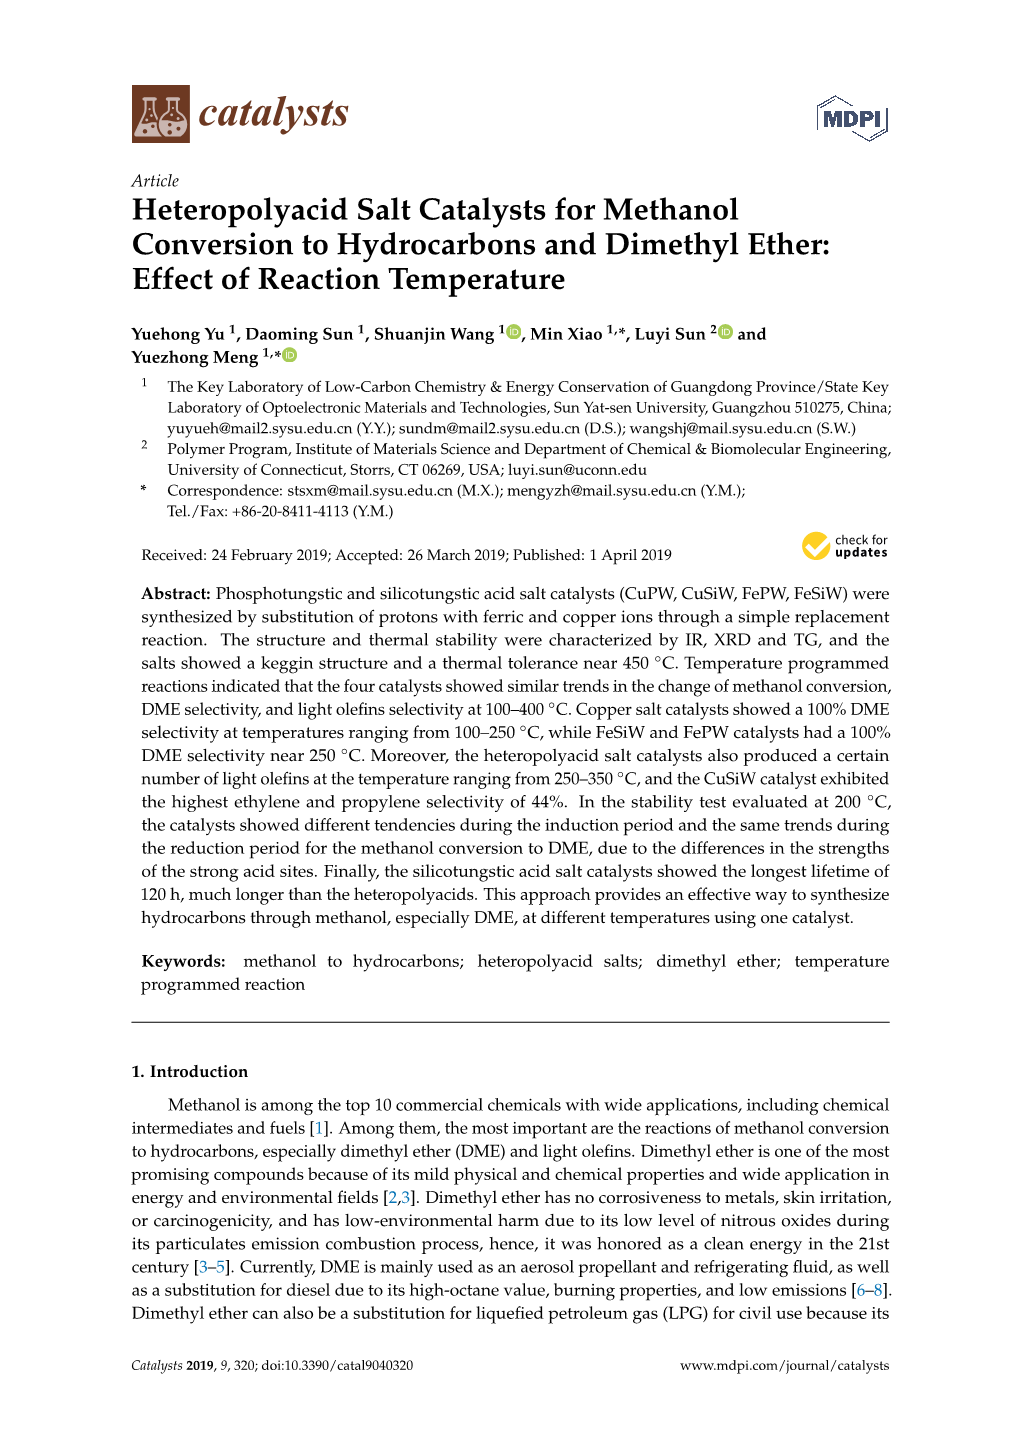 Heteropolyacid Salt Catalysts for Methanol Conversion to Hydrocarbons and Dimethyl Ether: Effect of Reaction Temperature